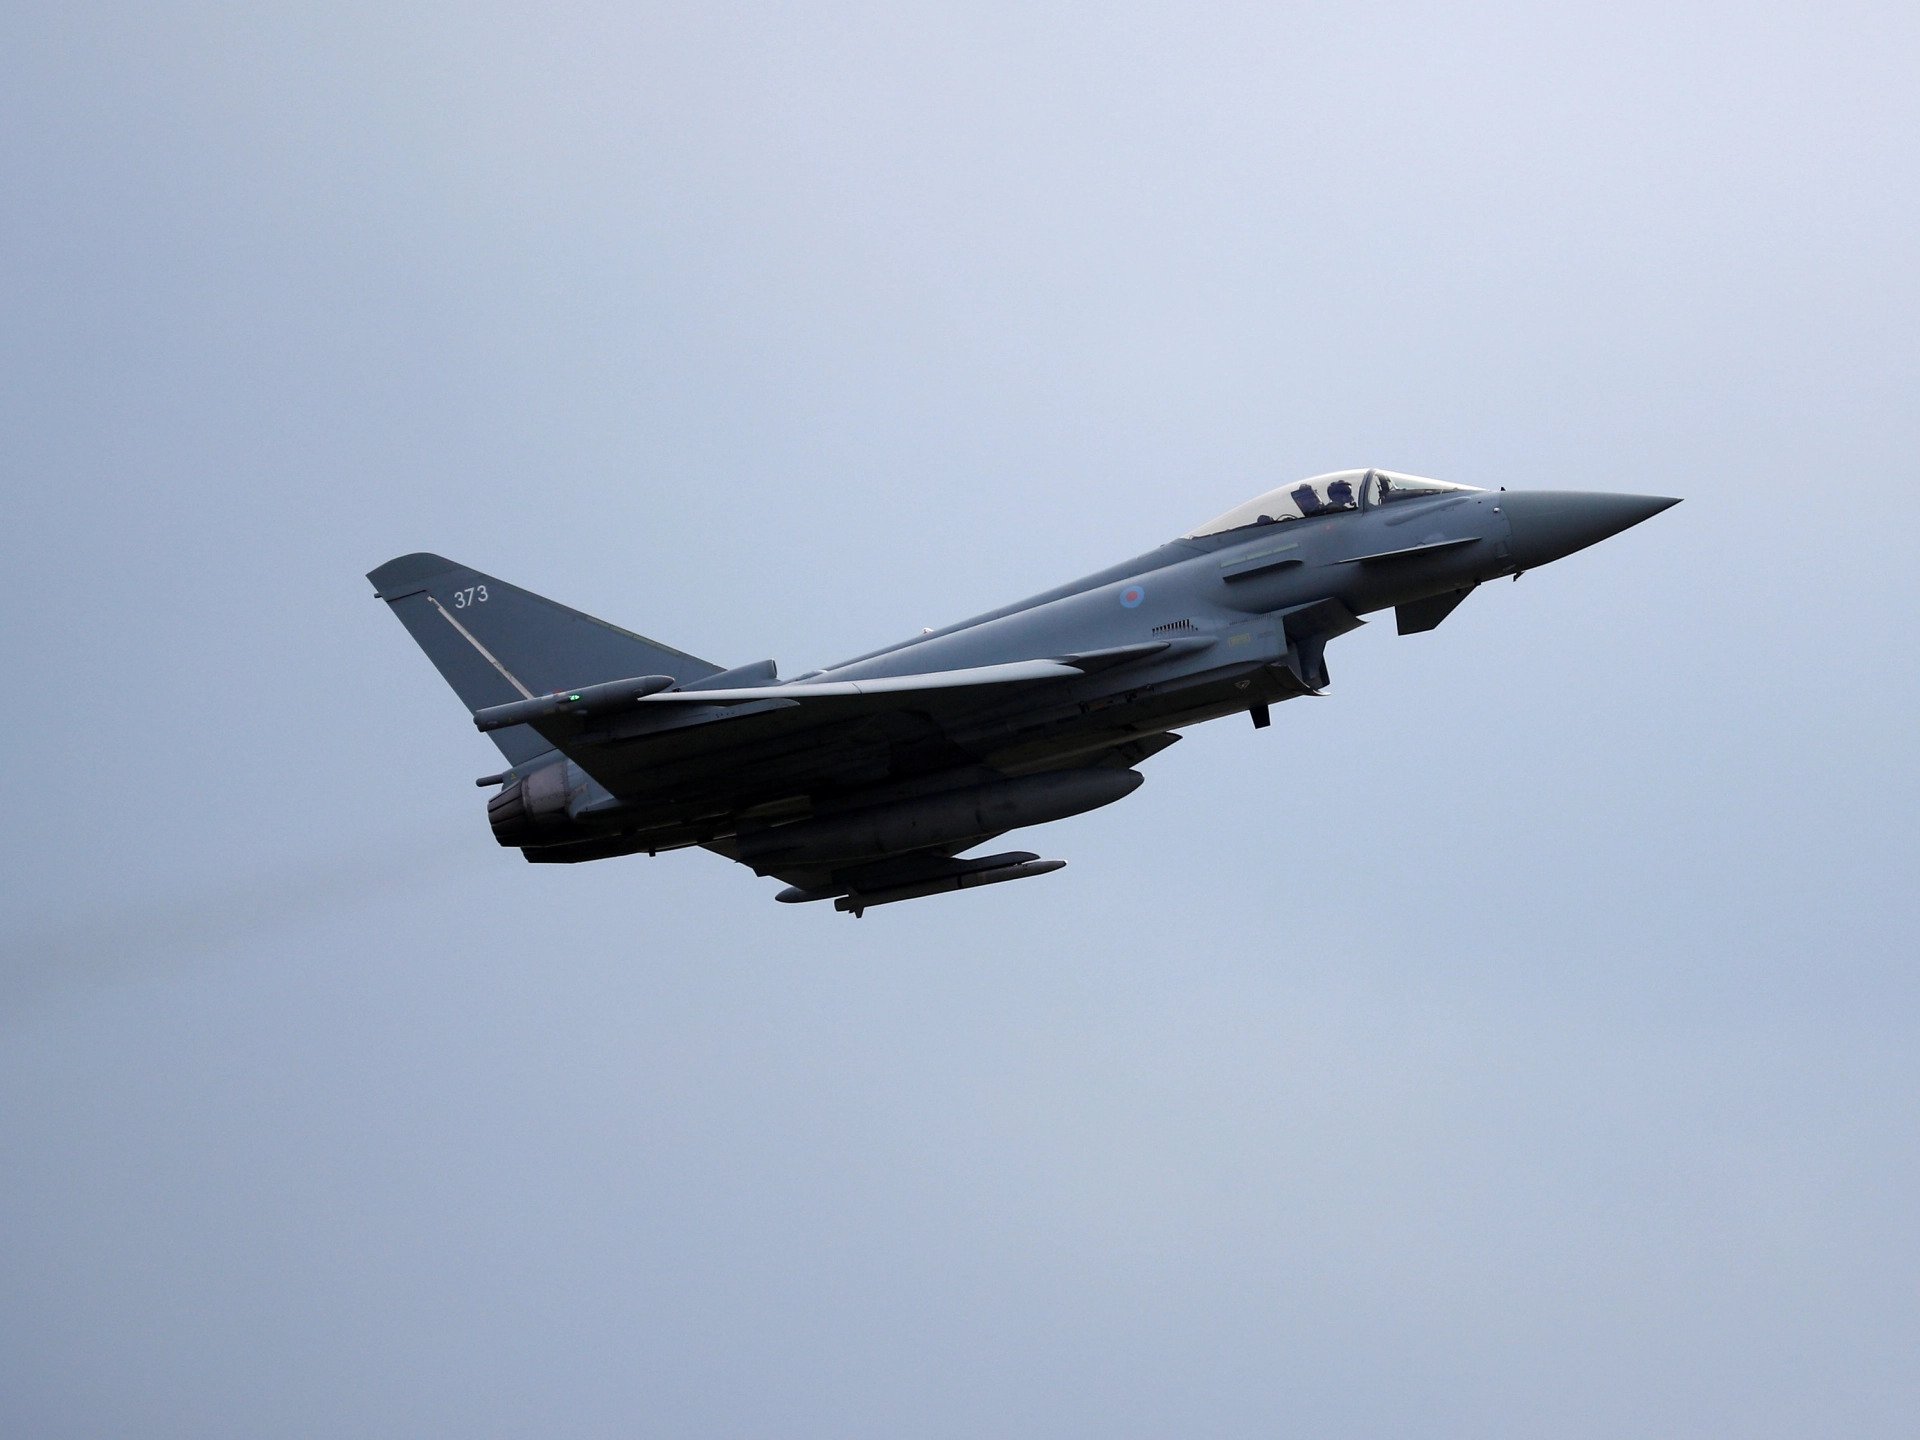 A Typhoon jet takes off from the RAF's Coningsby base in Lincolnshire, the UK